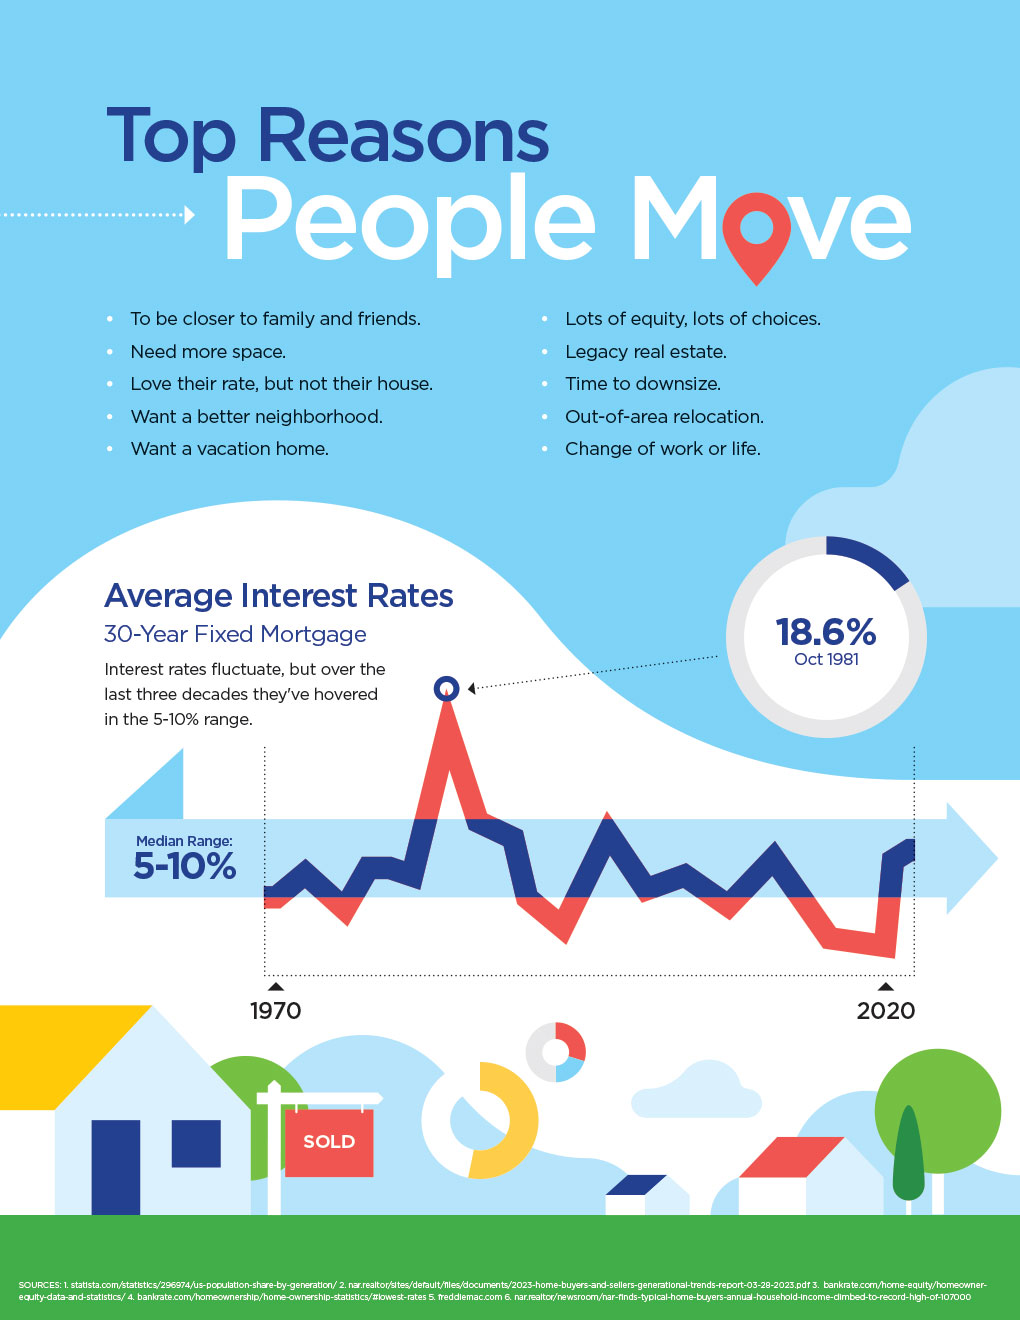 Top Reasons People Move